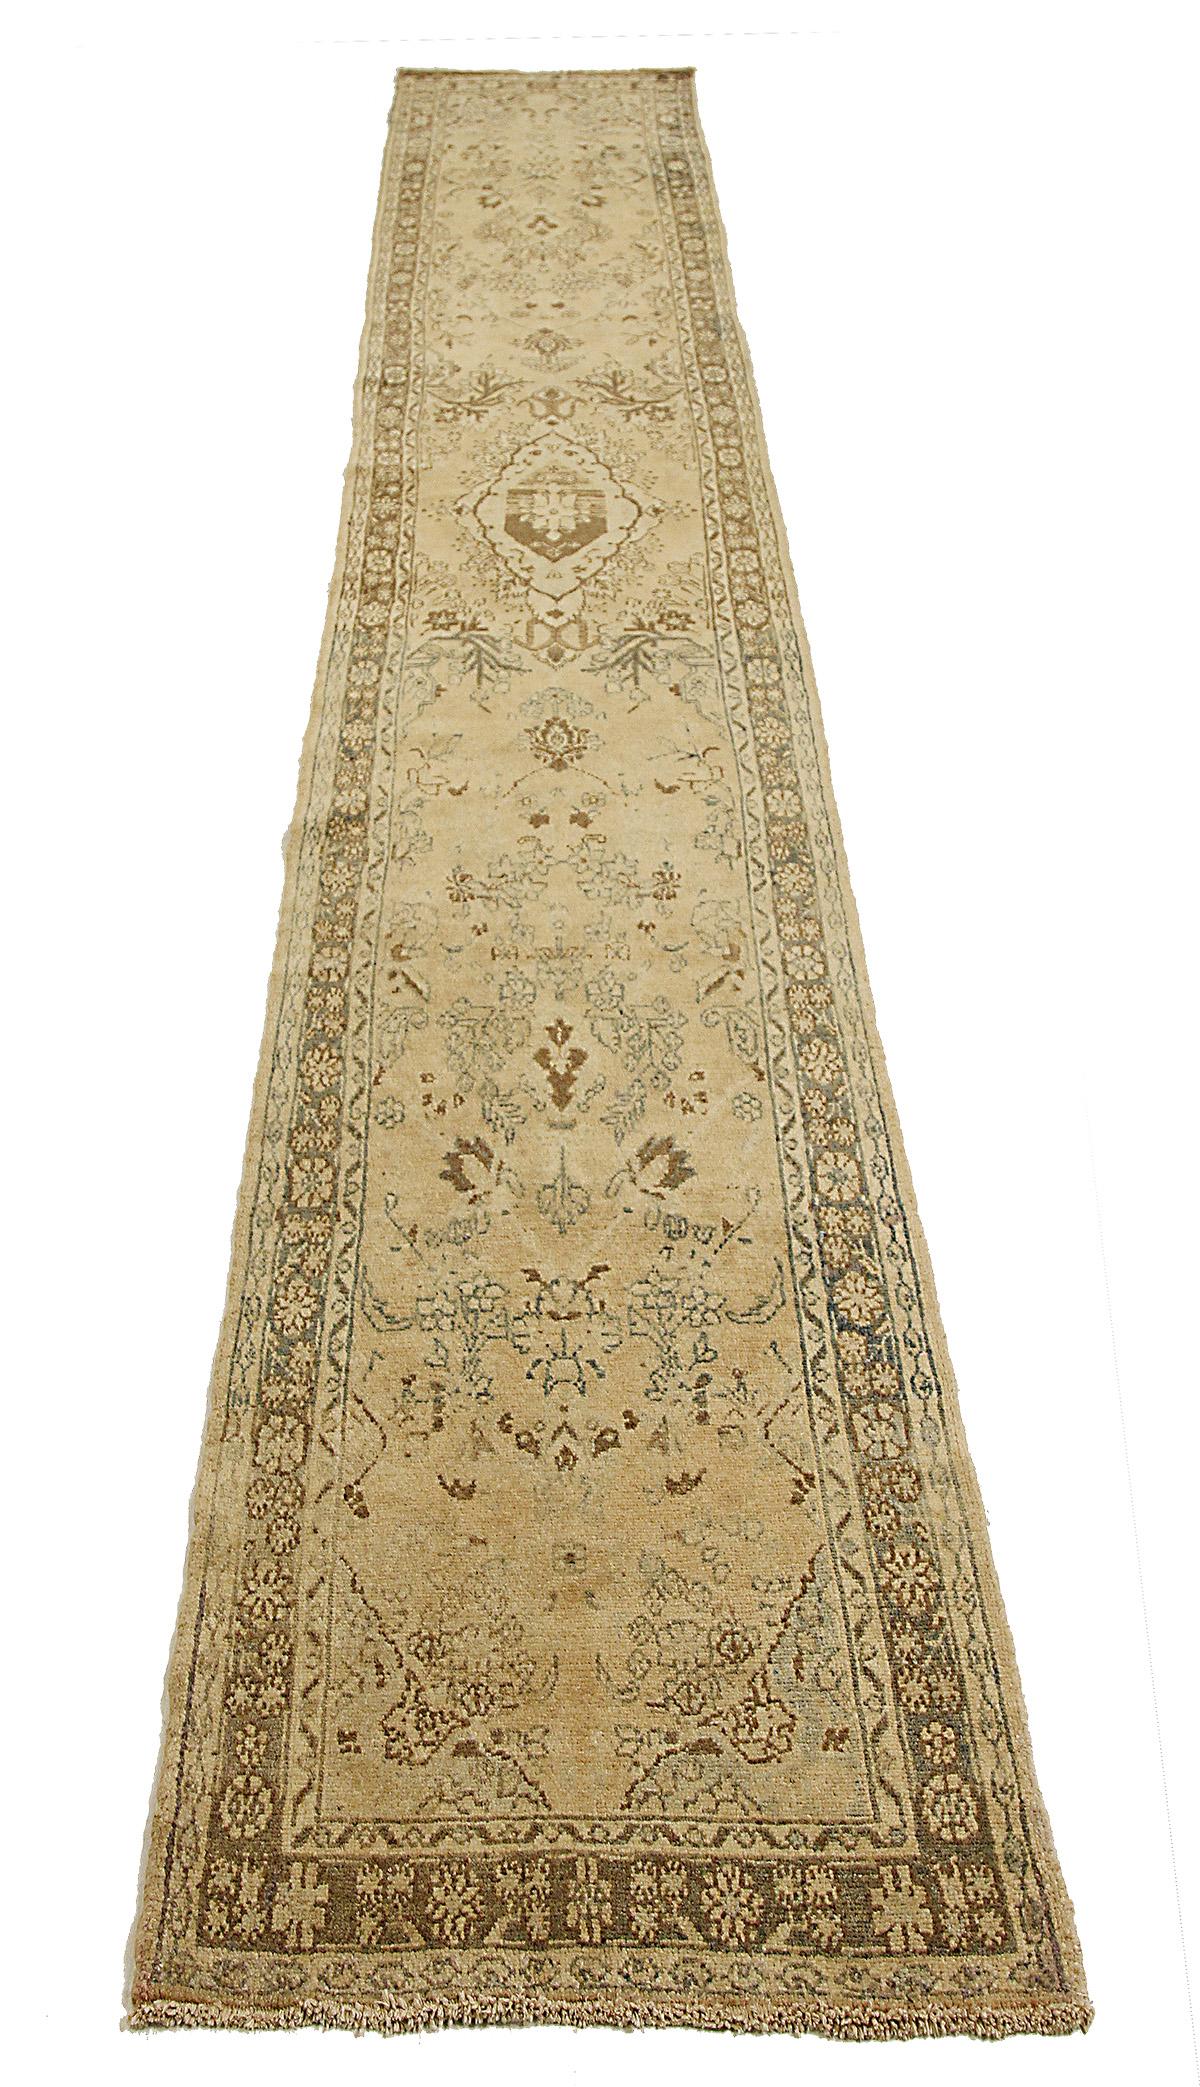 Antique Persian runner rug handwoven from the finest sheep’s wool and colored with all-natural vegetable dyes that are safe for humans and pets. It’s a traditional Hamadan design featuring floral patterns in brown and ivory over a beige field. The